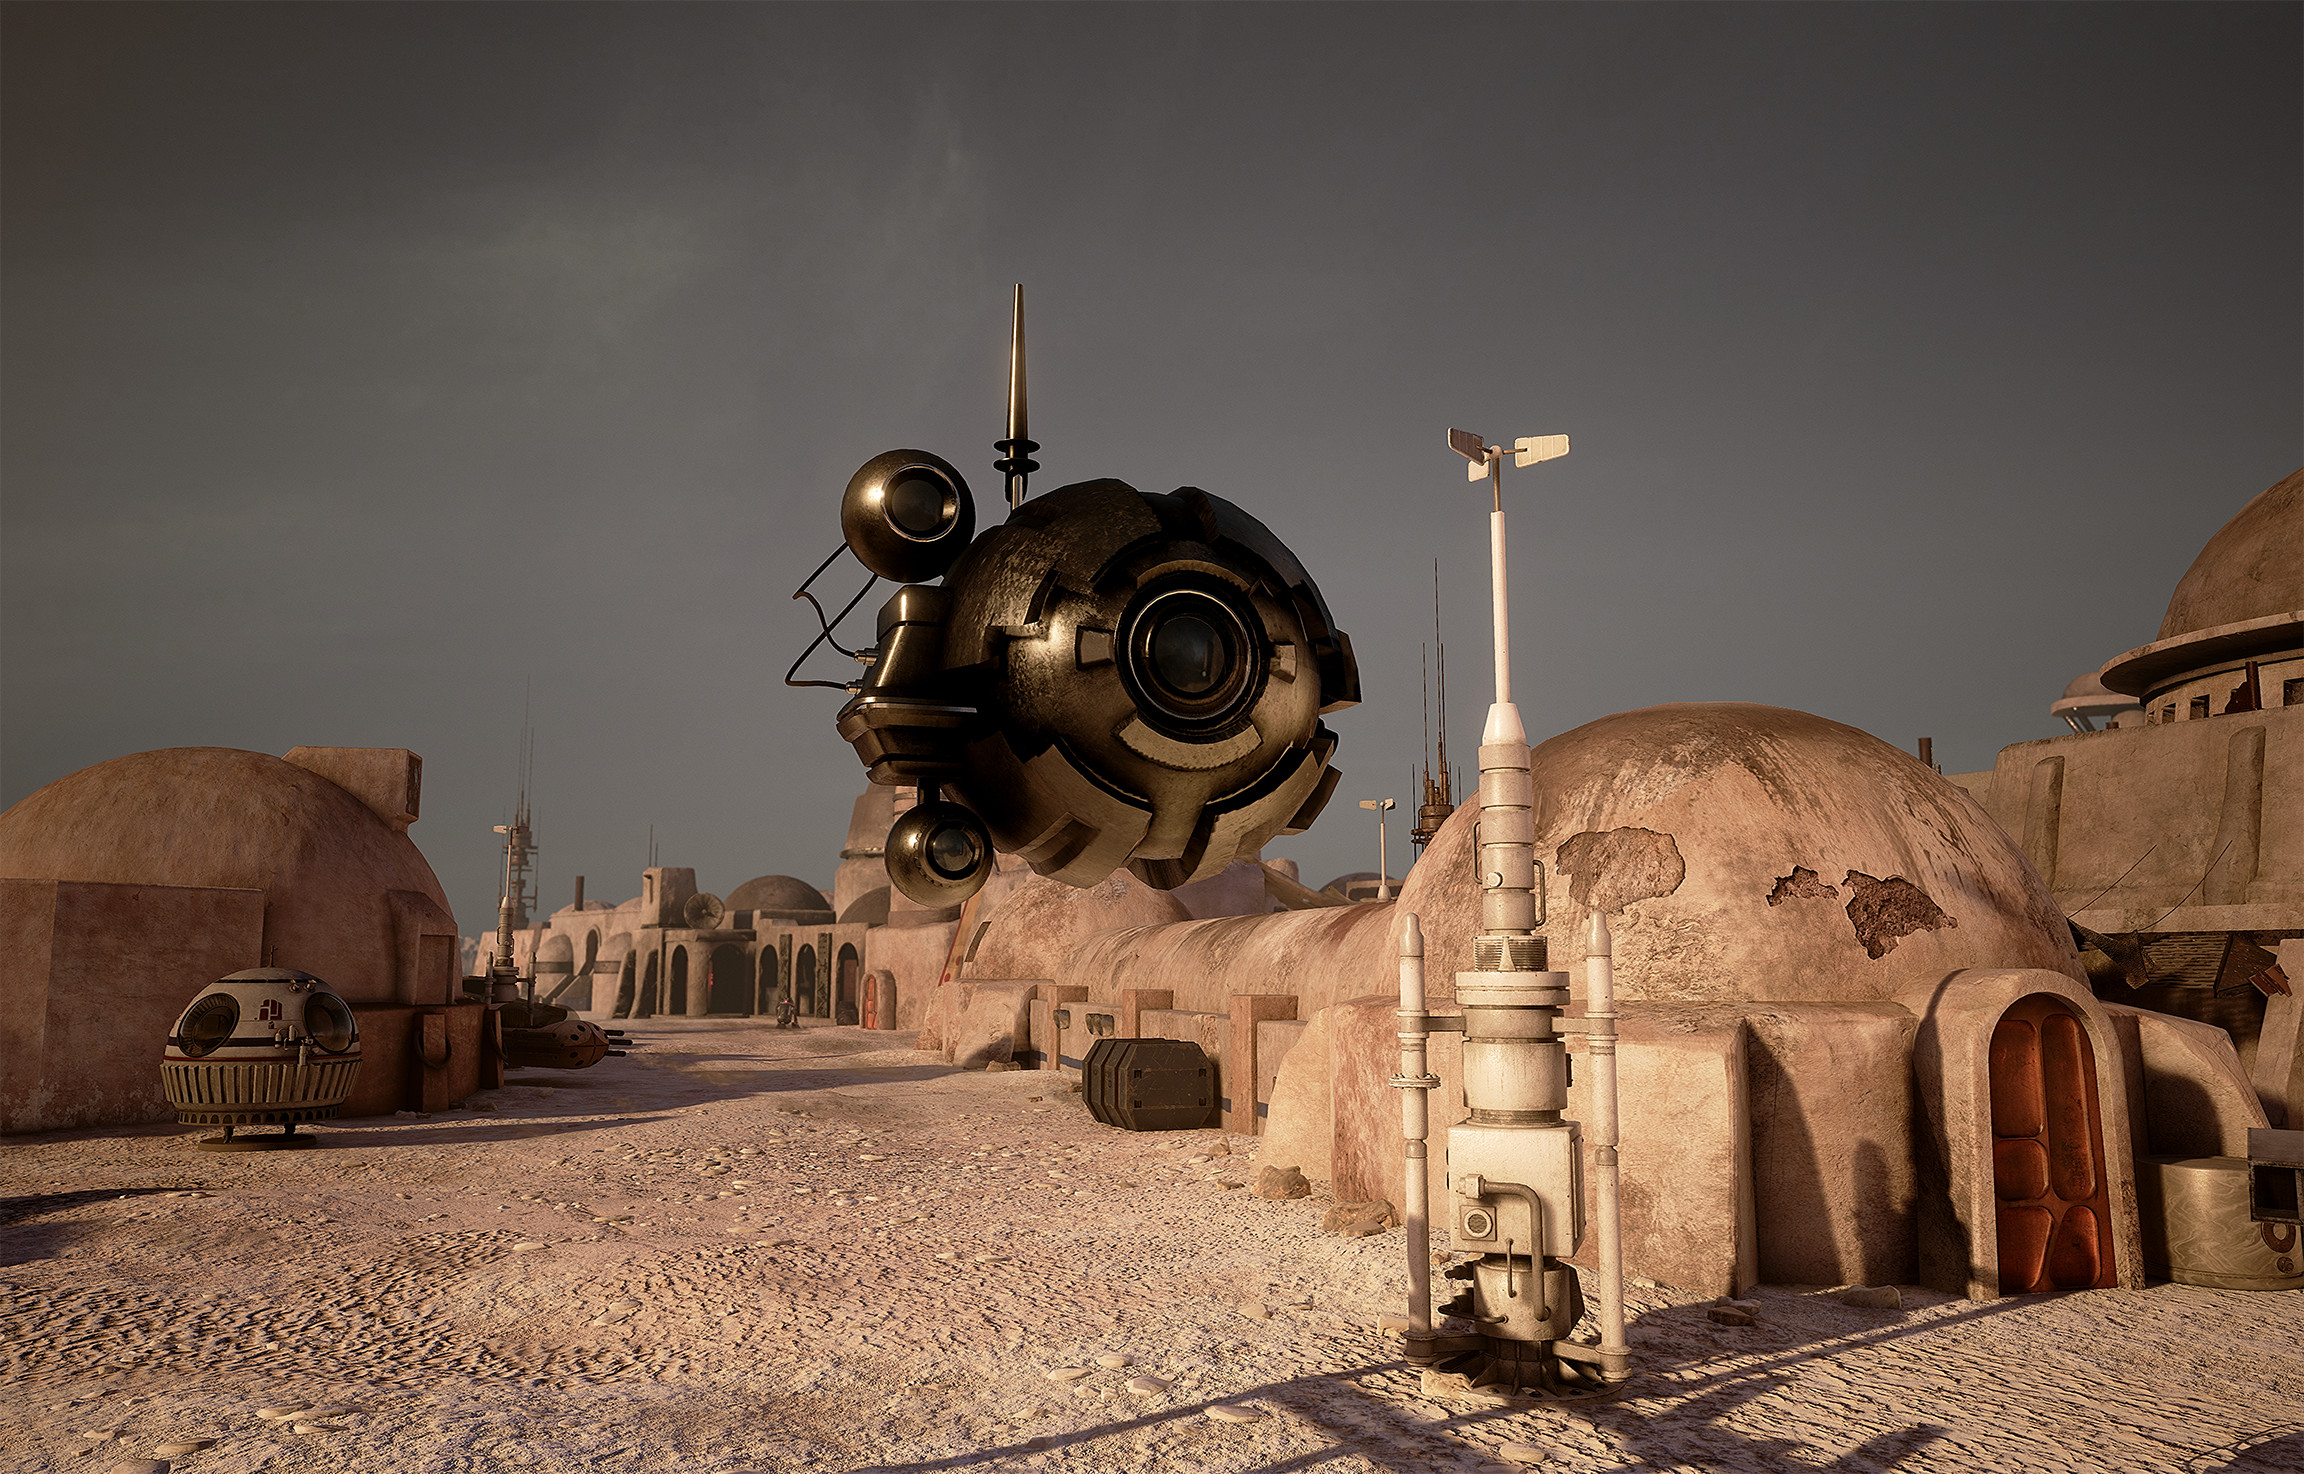 Scout Droid: model, textures, shader
Buildings: model, textures, shader